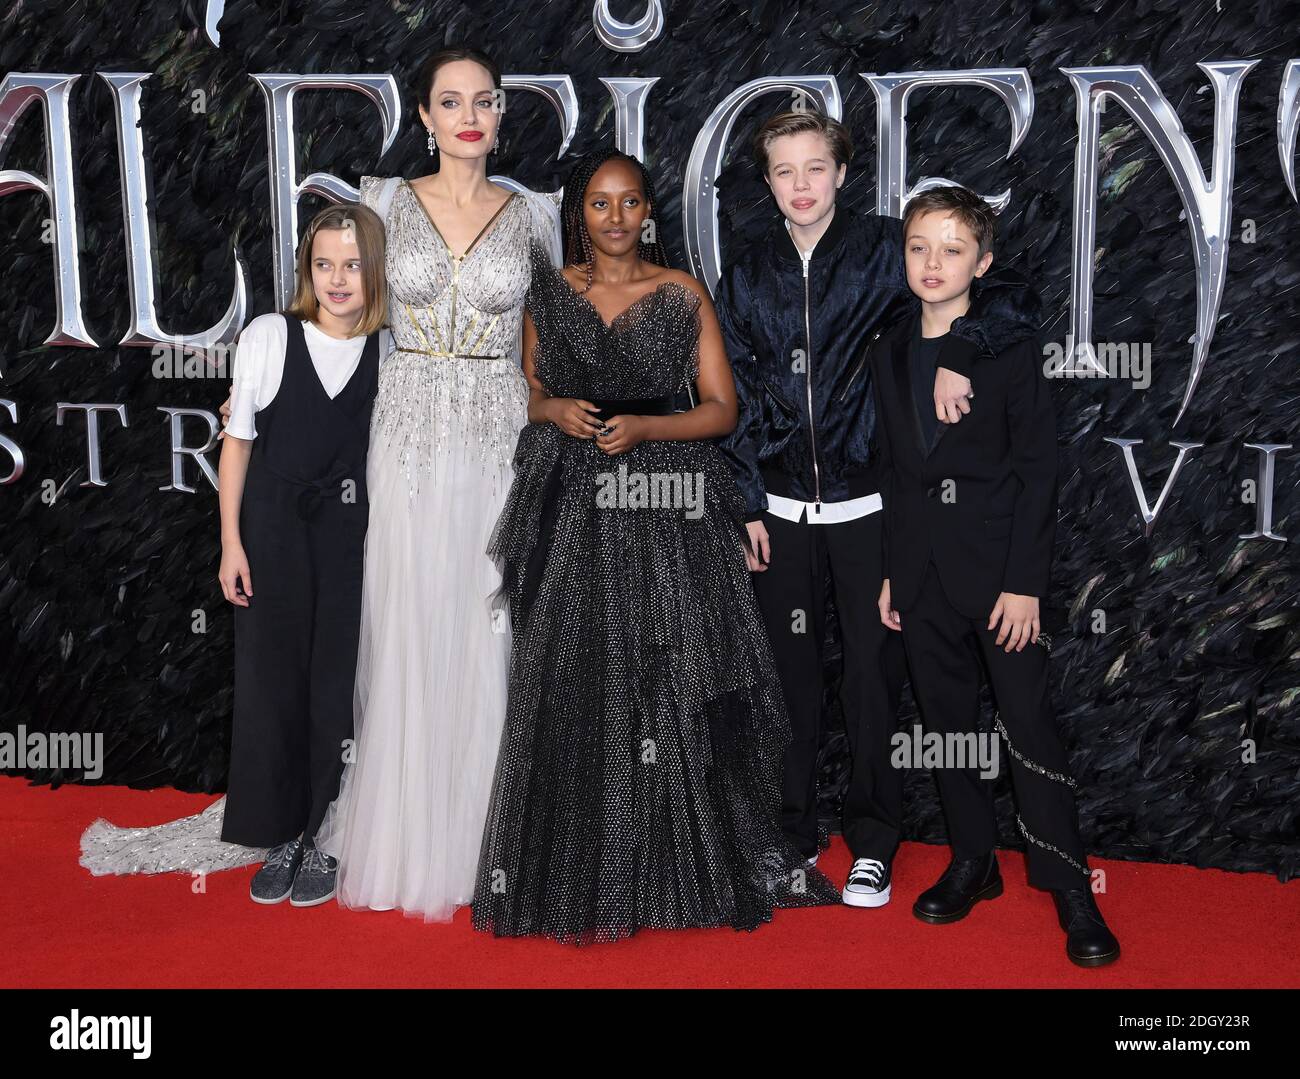 Vivienne Marcheline Jolie-Pitt, Angelina Jolie, Zahara Marley Jolie-Pitt, Shiloh Nouvel Jolie-Pitt and Knox Jolie-Pitt attending the European premiere of Maleficent: Mistress of Evil, held at the Odeon IMAX Waterloo, in London. Picture credit should read: Doug Peters/EMPICS Stock Photo